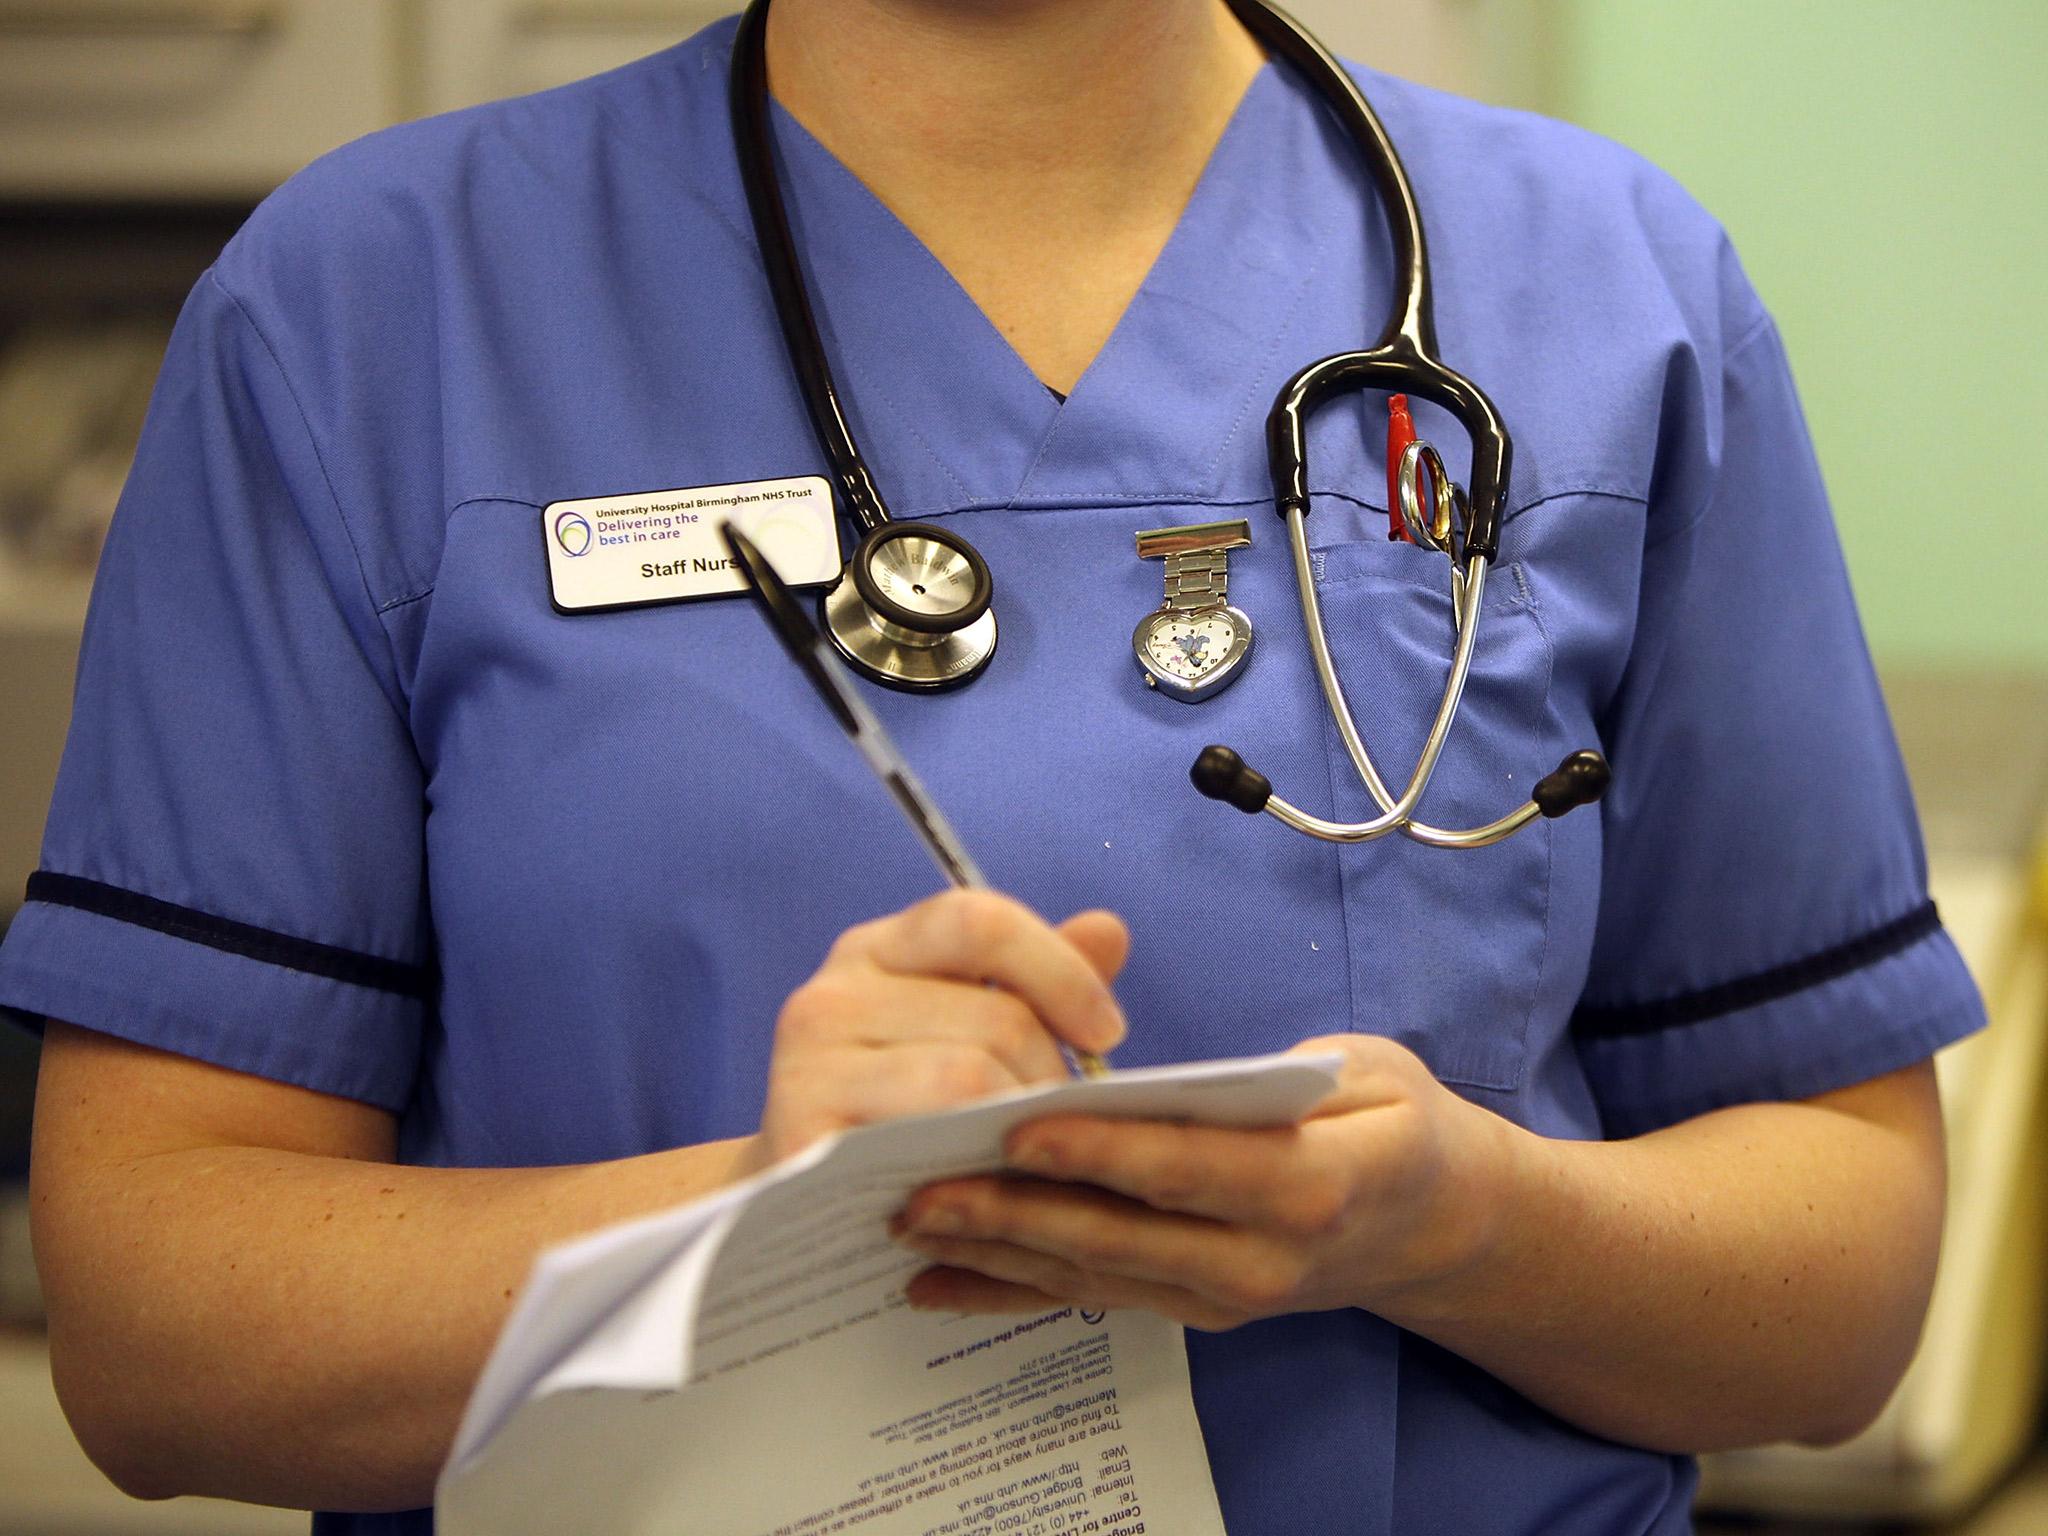 Hospital Death Rates Rise If Fewer Nurses Are On Wards Says New